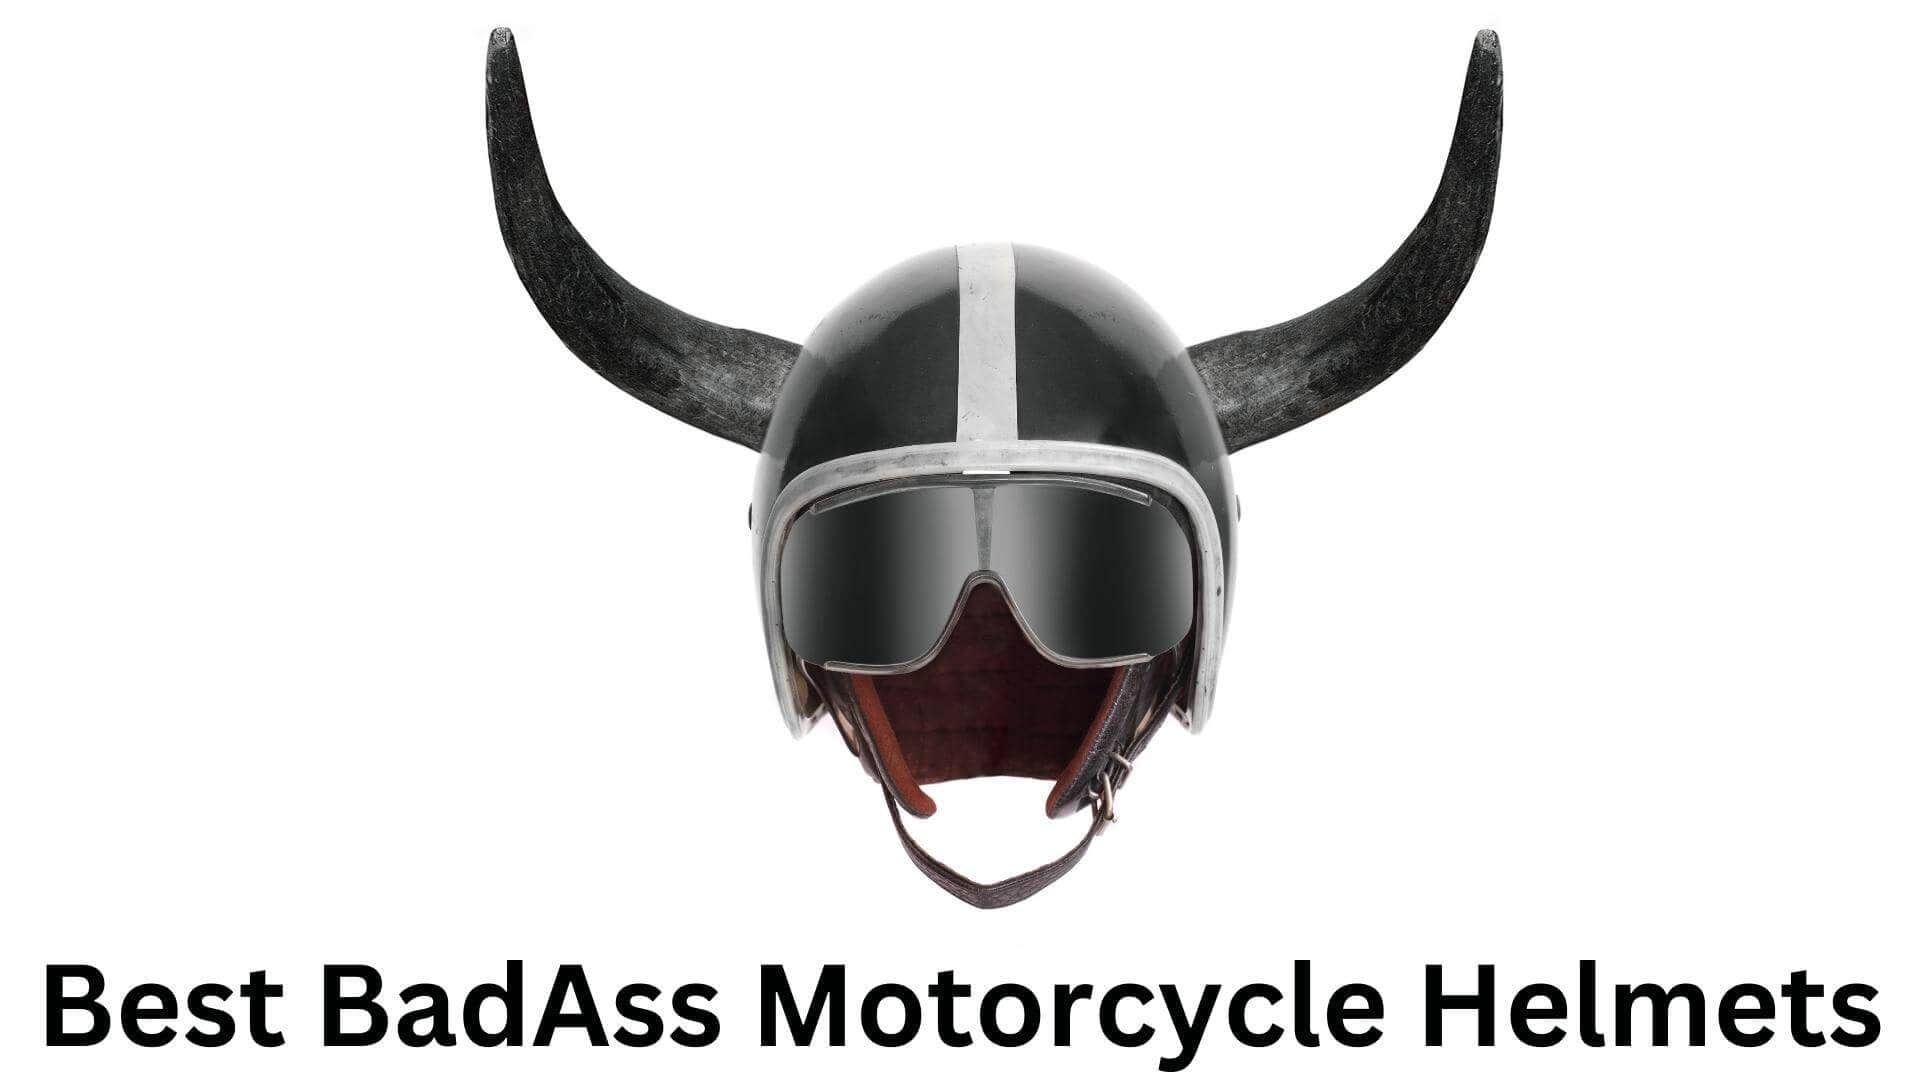 3 Awesome Badass Motorcycle Helmets That Will Make You Look Like A Rockstar!